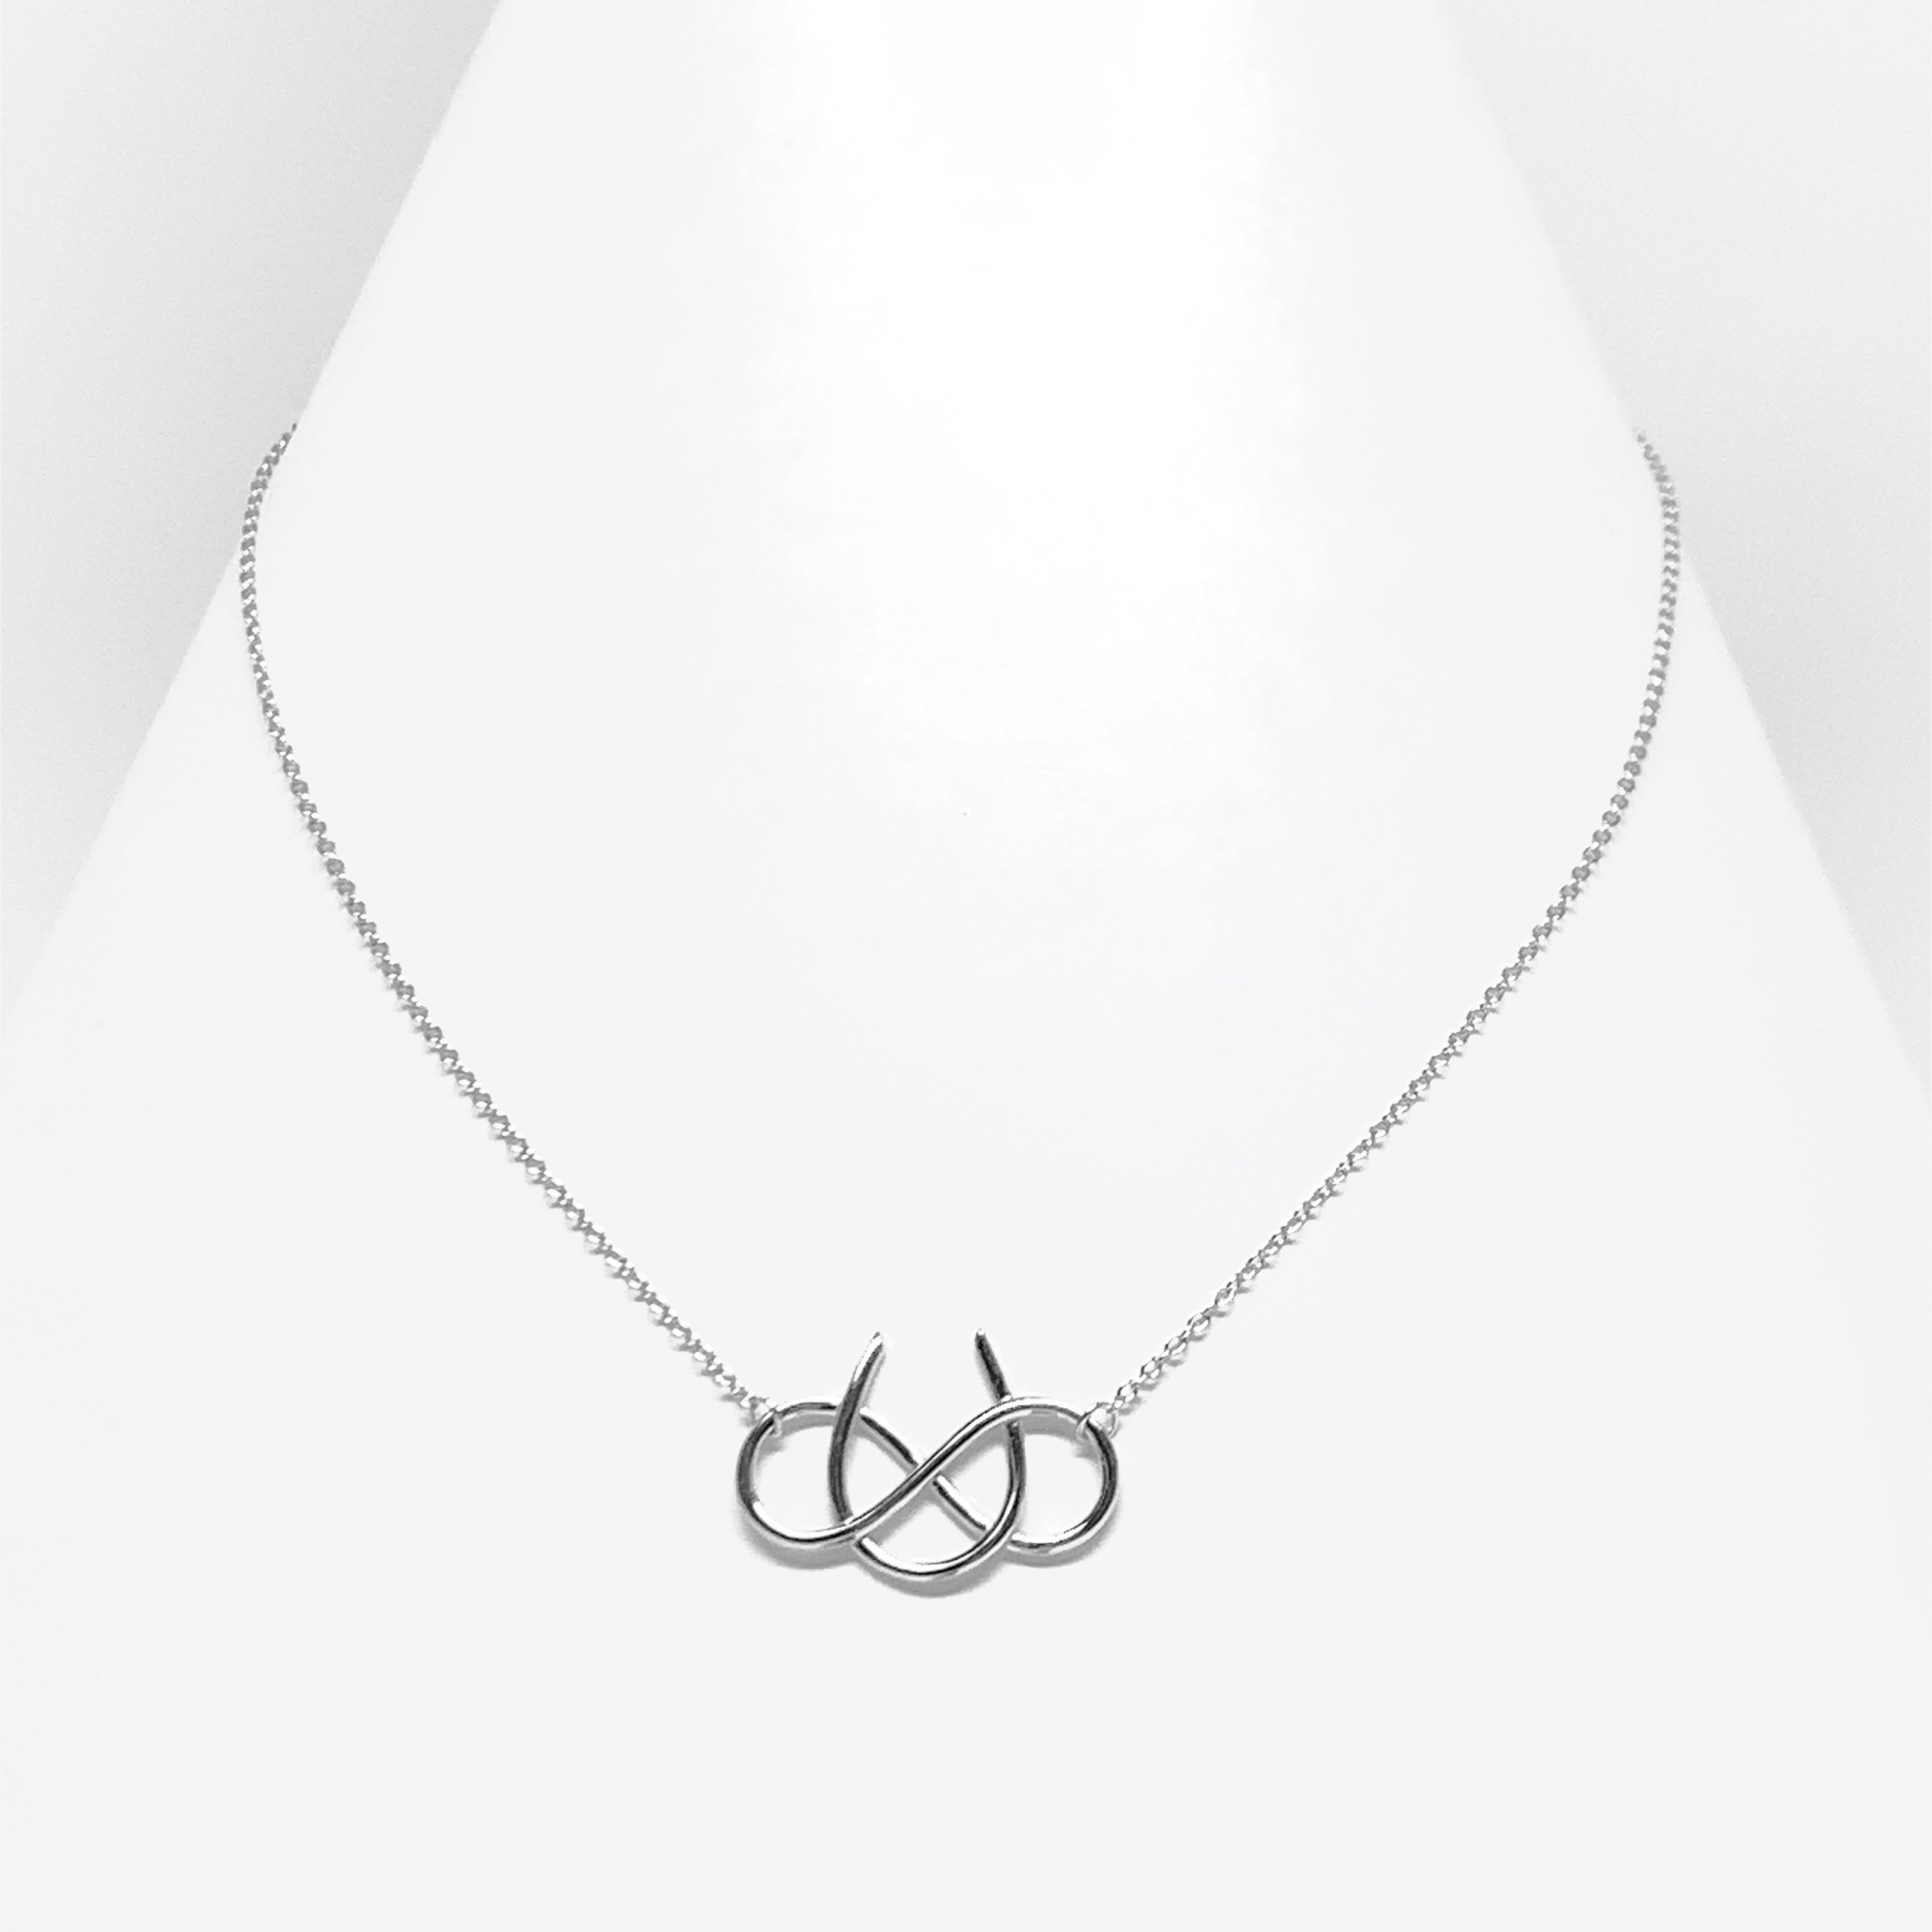 Equestrian infinity necklace